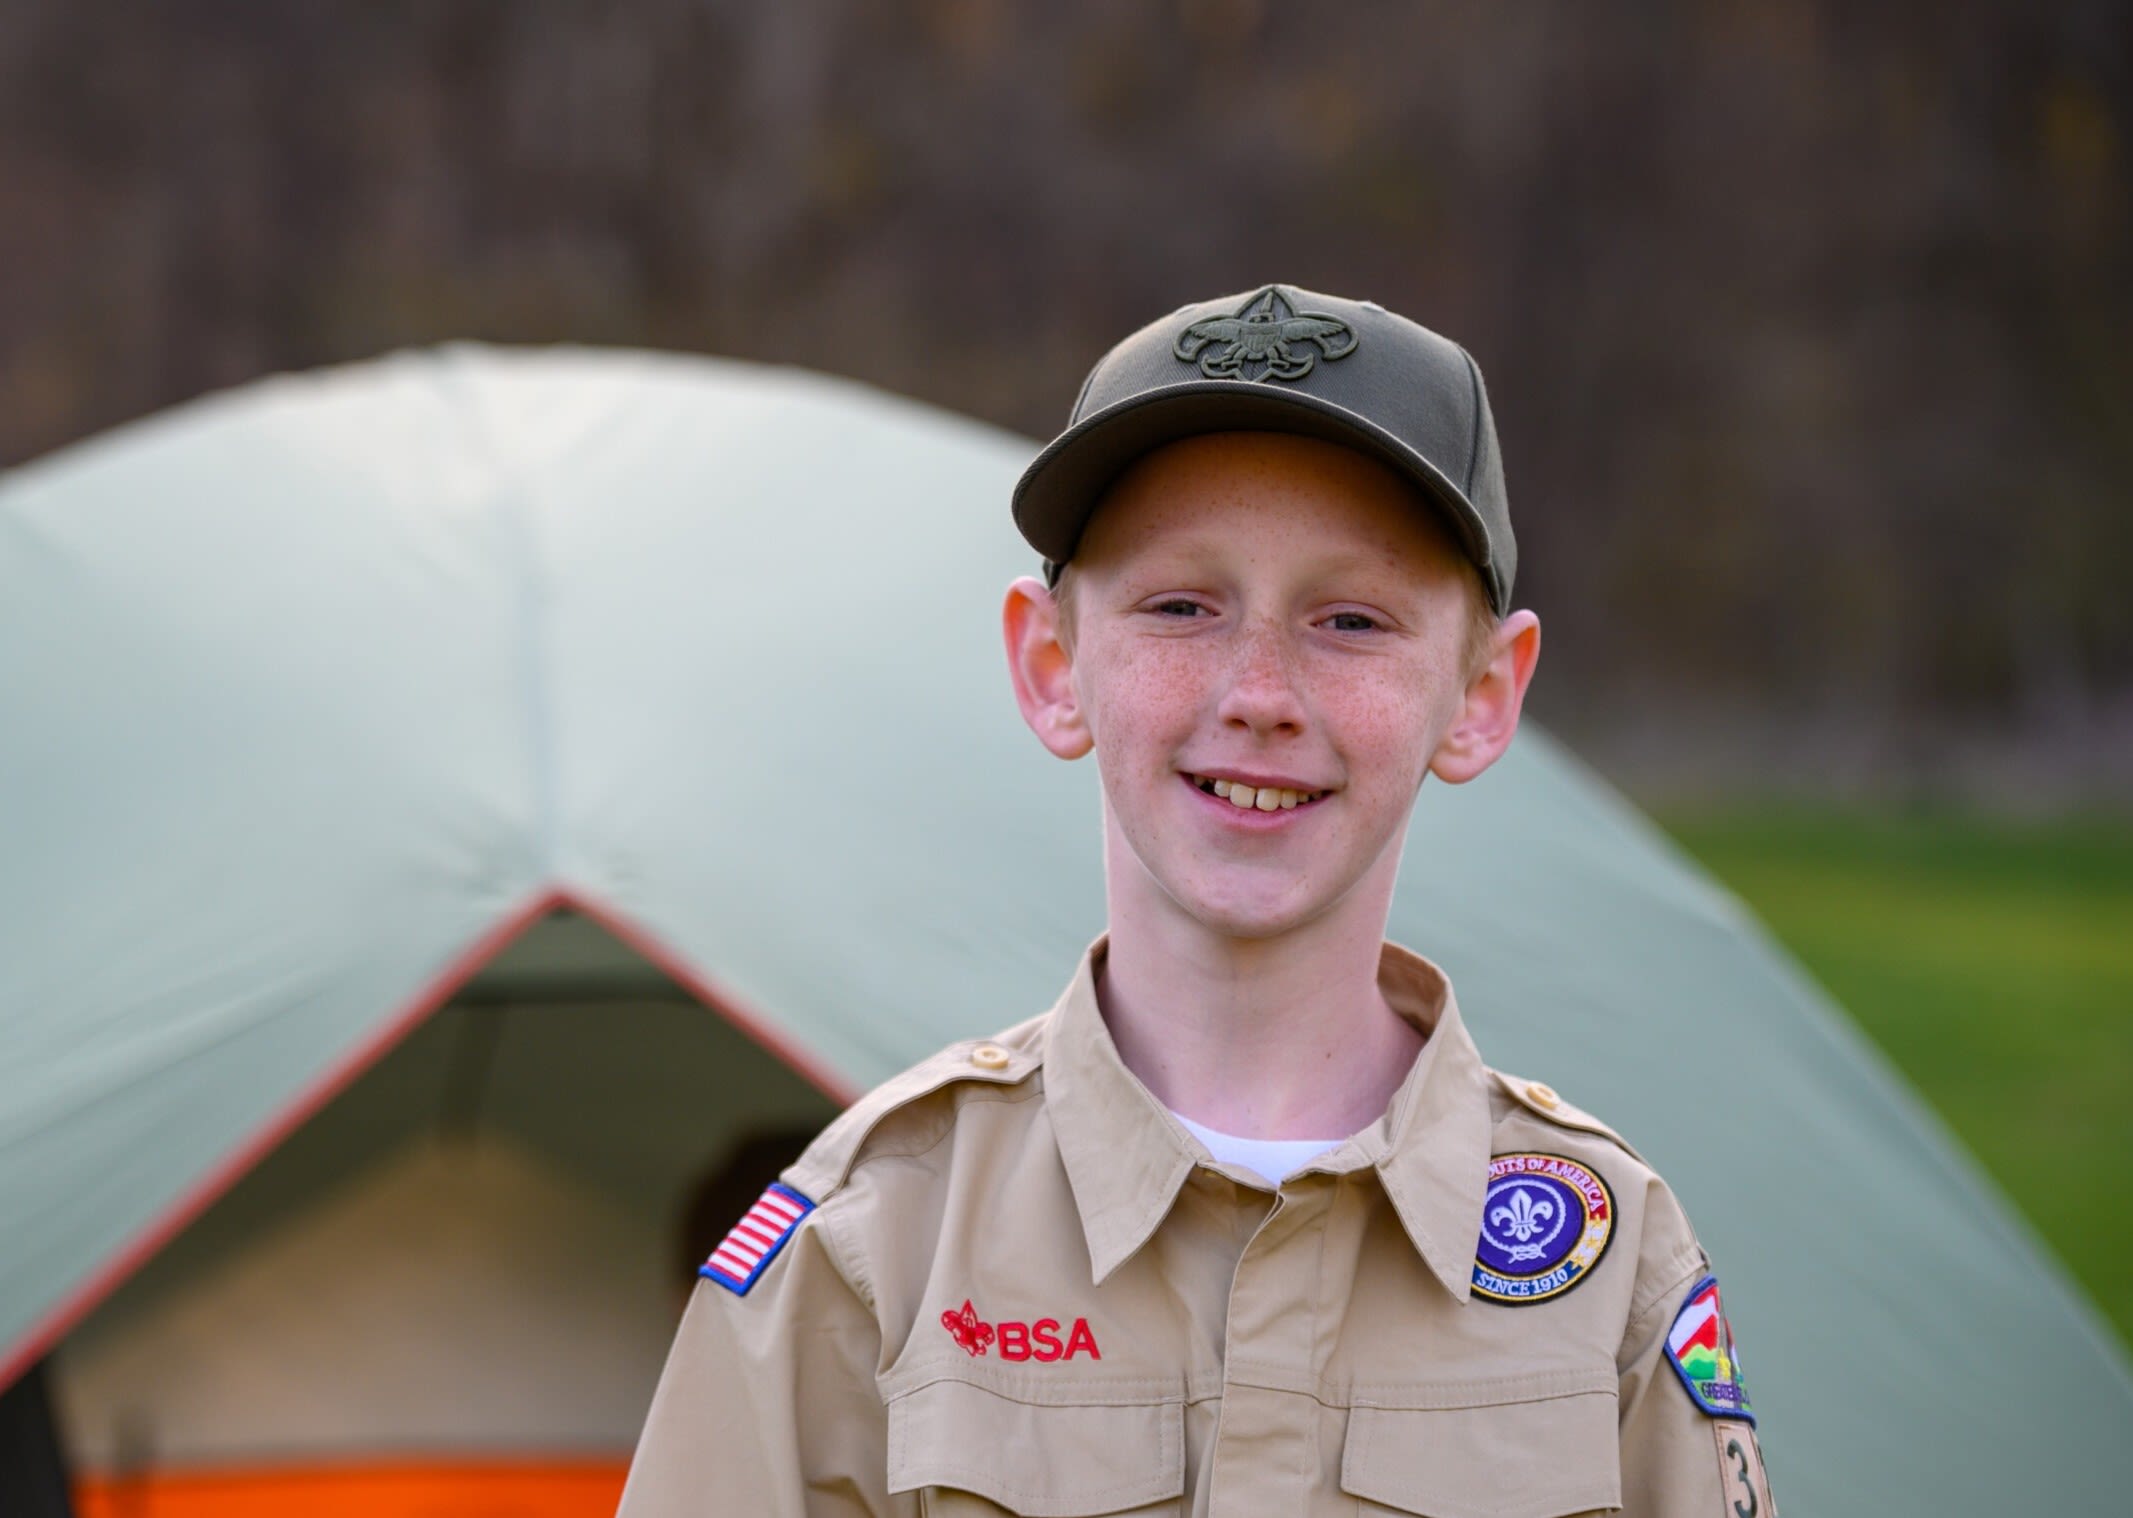 Boy Scouts Destroyed Itself By Accepting Girls - The American Spectator | USA News and Politics